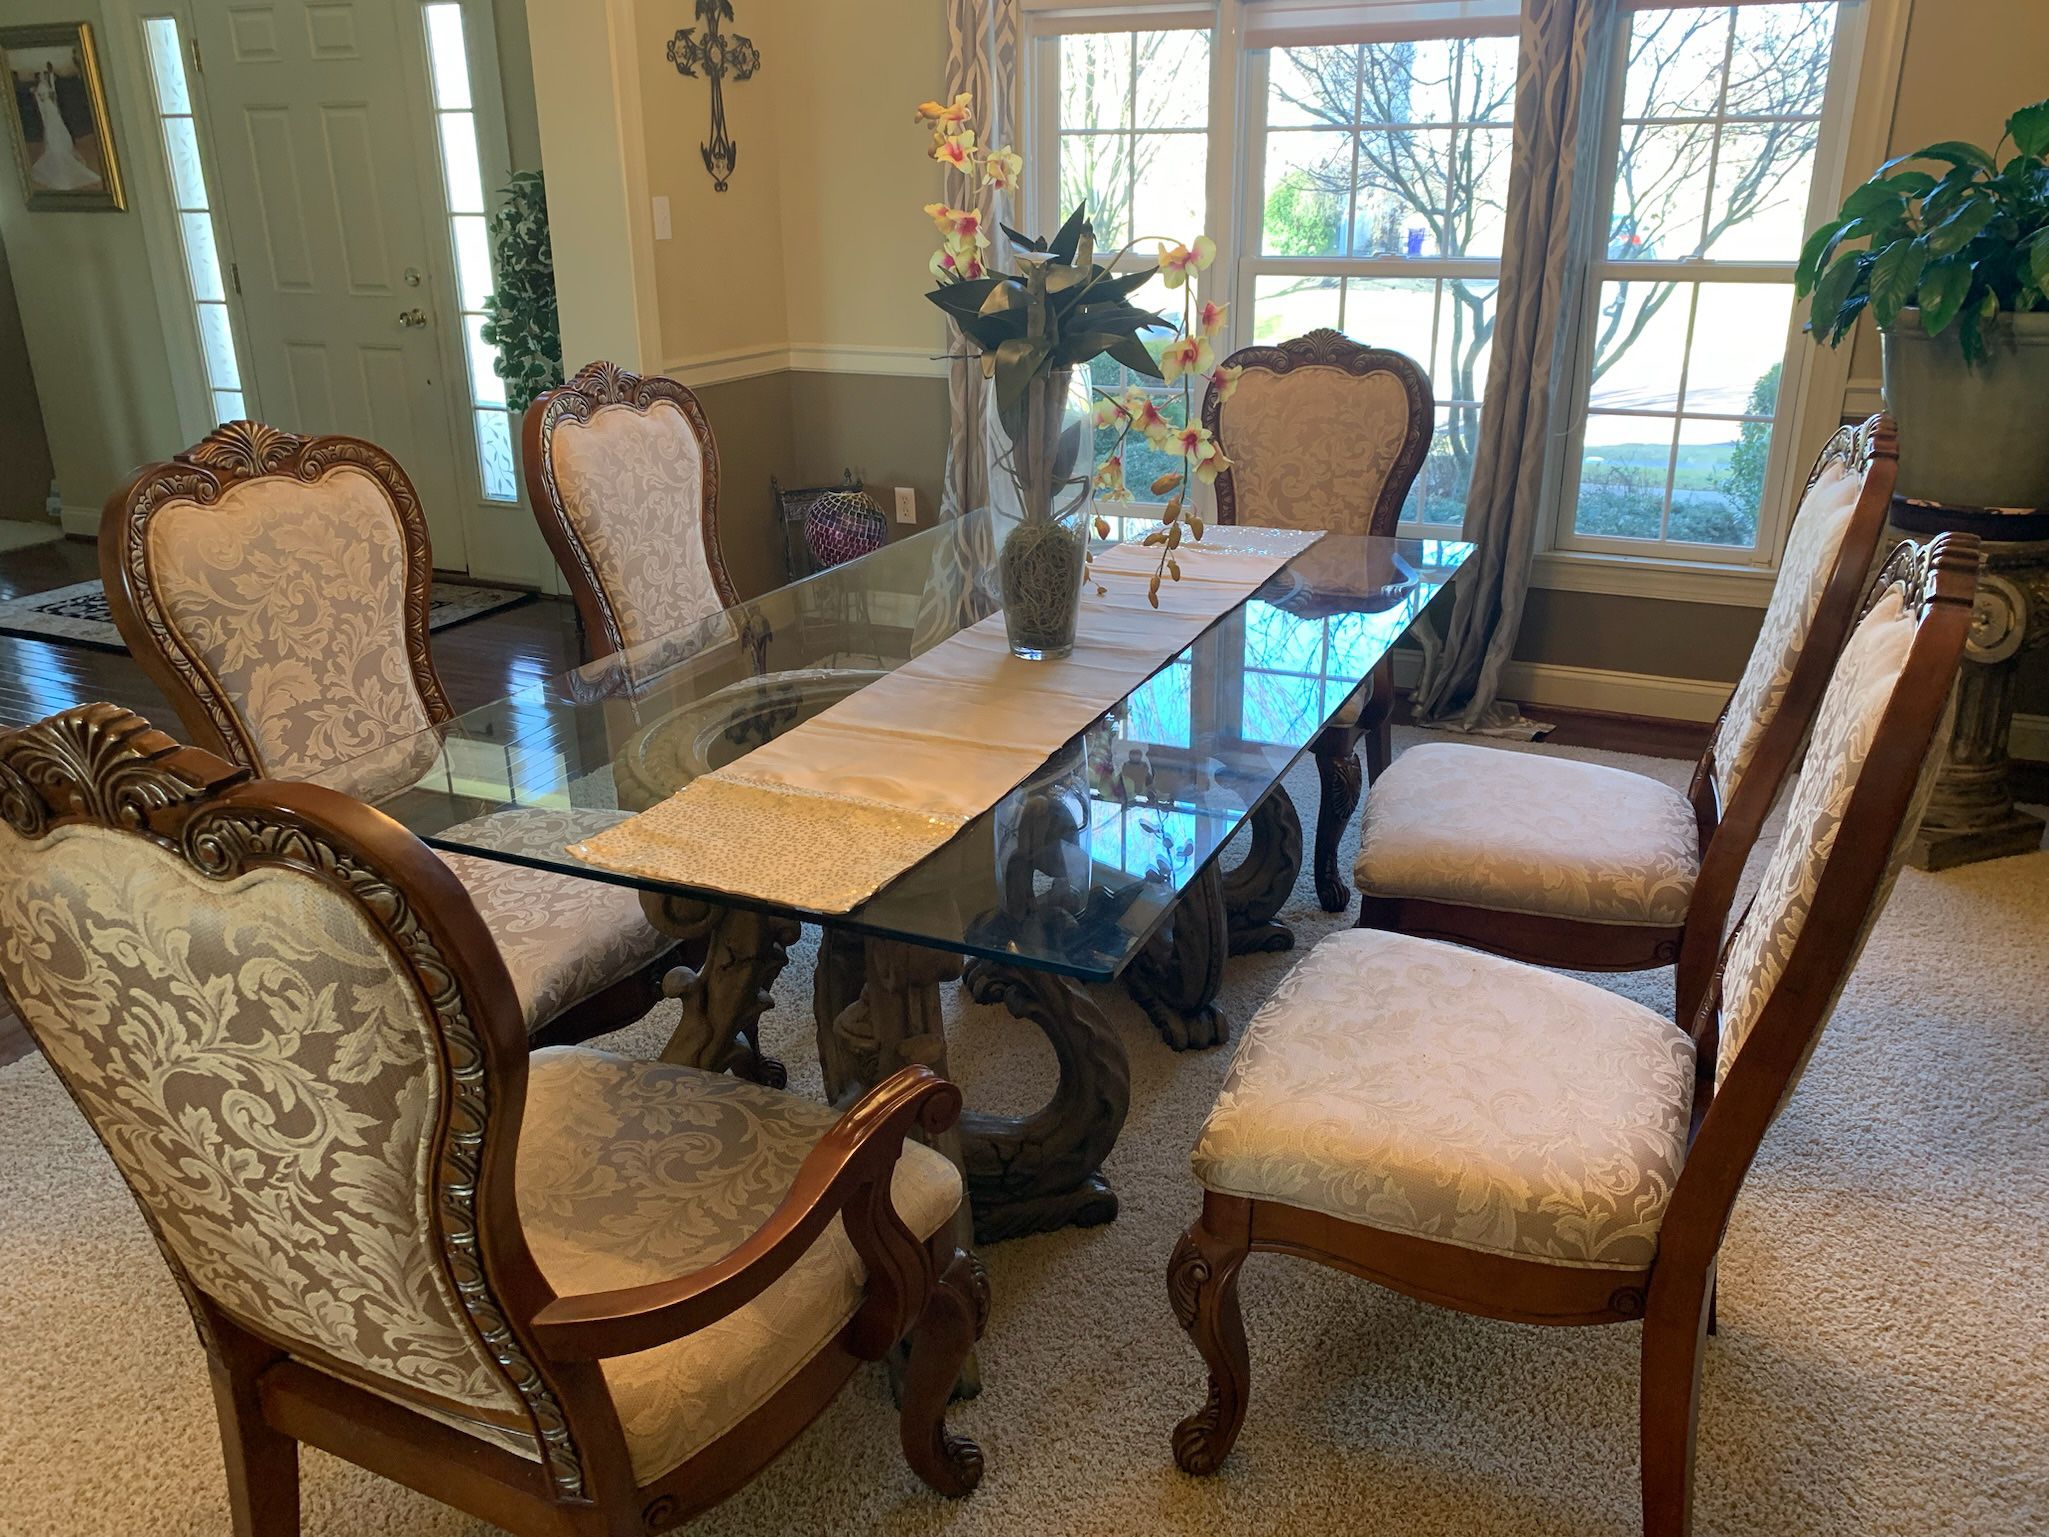 Dining Room Table with 4 regular chairs and and 2 arm chairs